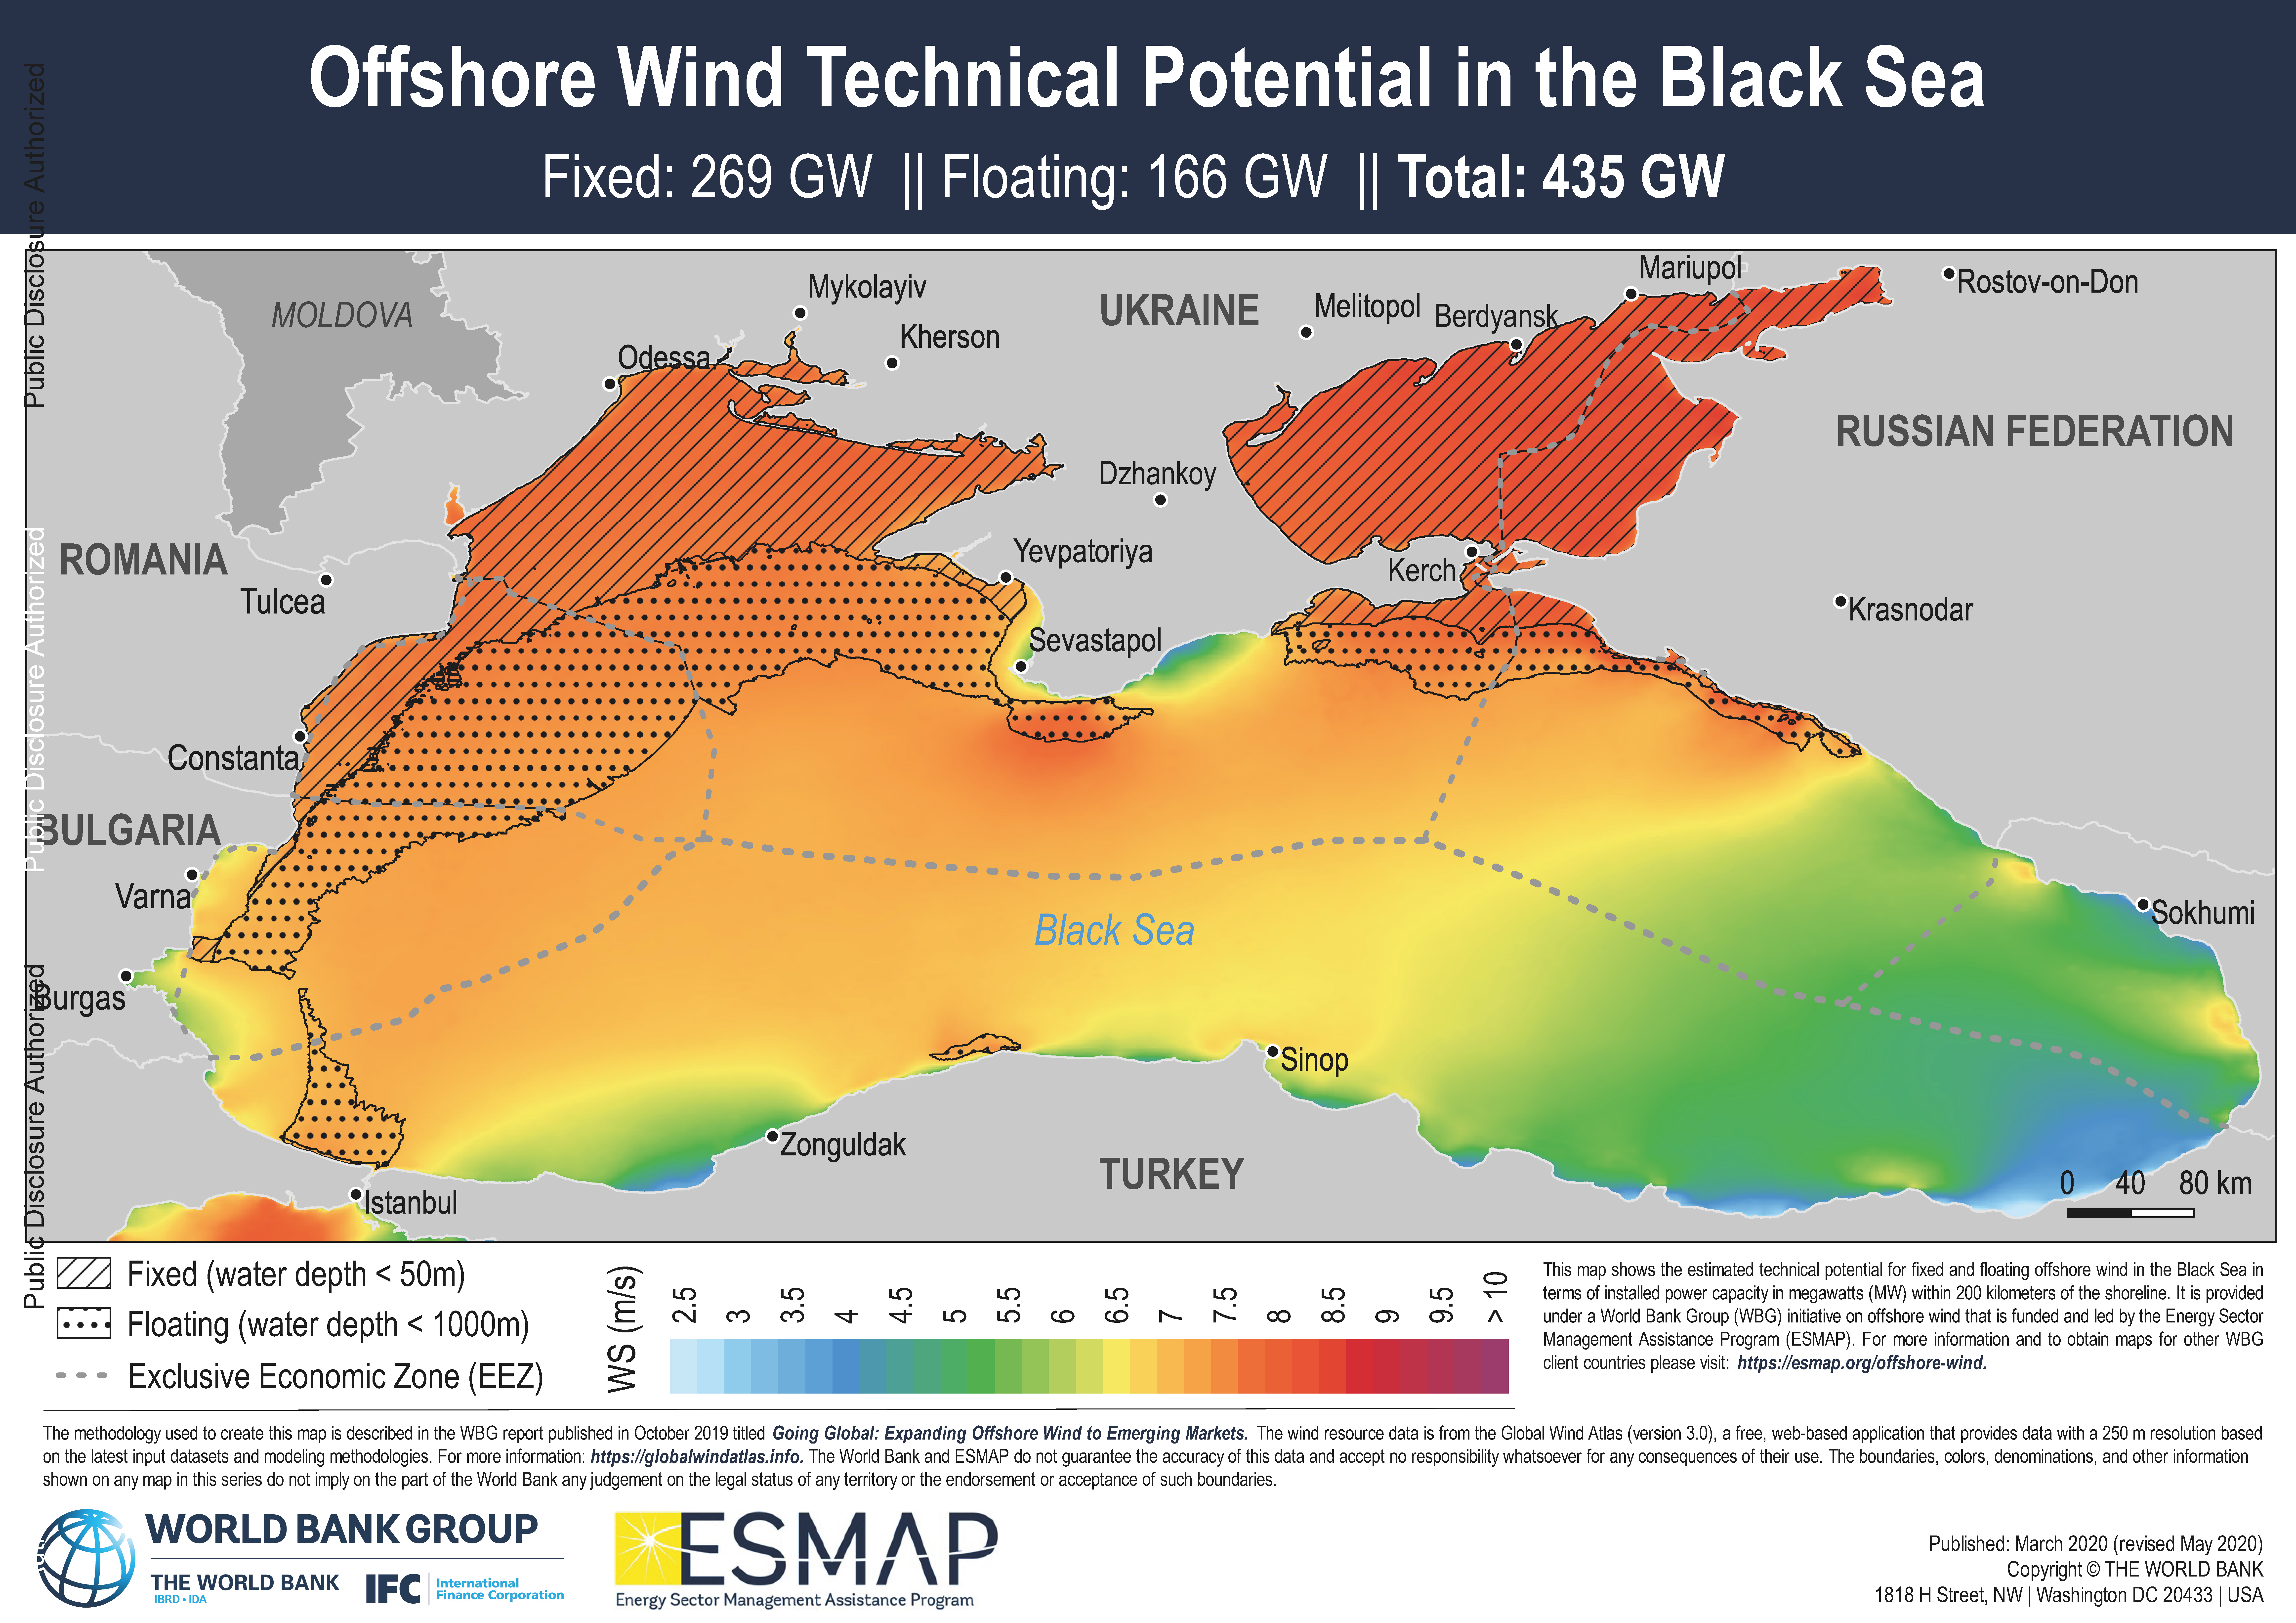 Is The Black Sea Ready For Offshore Wind Power?